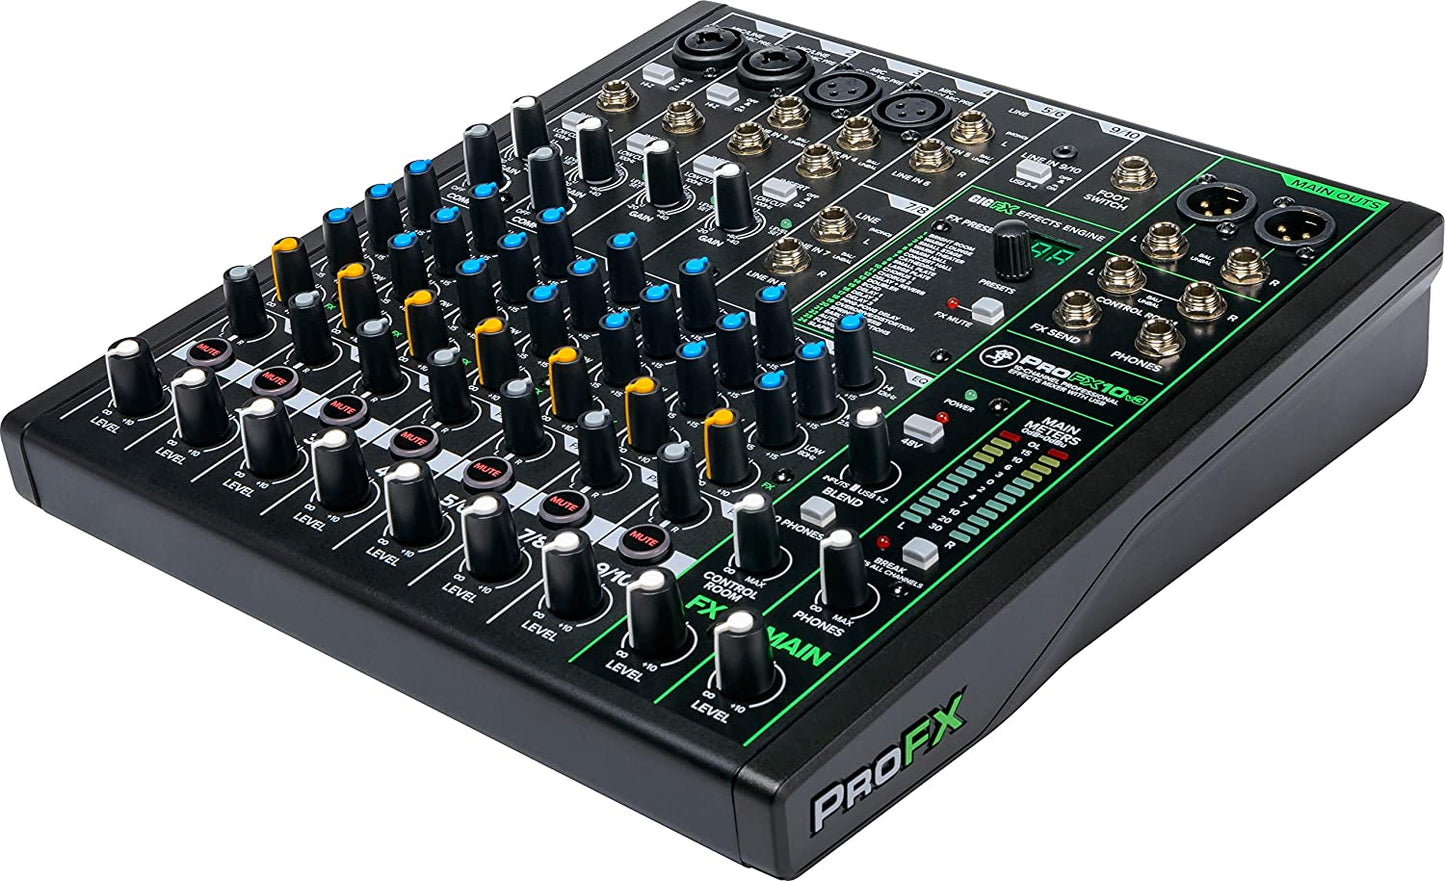 Mackie PROFX10-V3 Mixer. 100 Channel